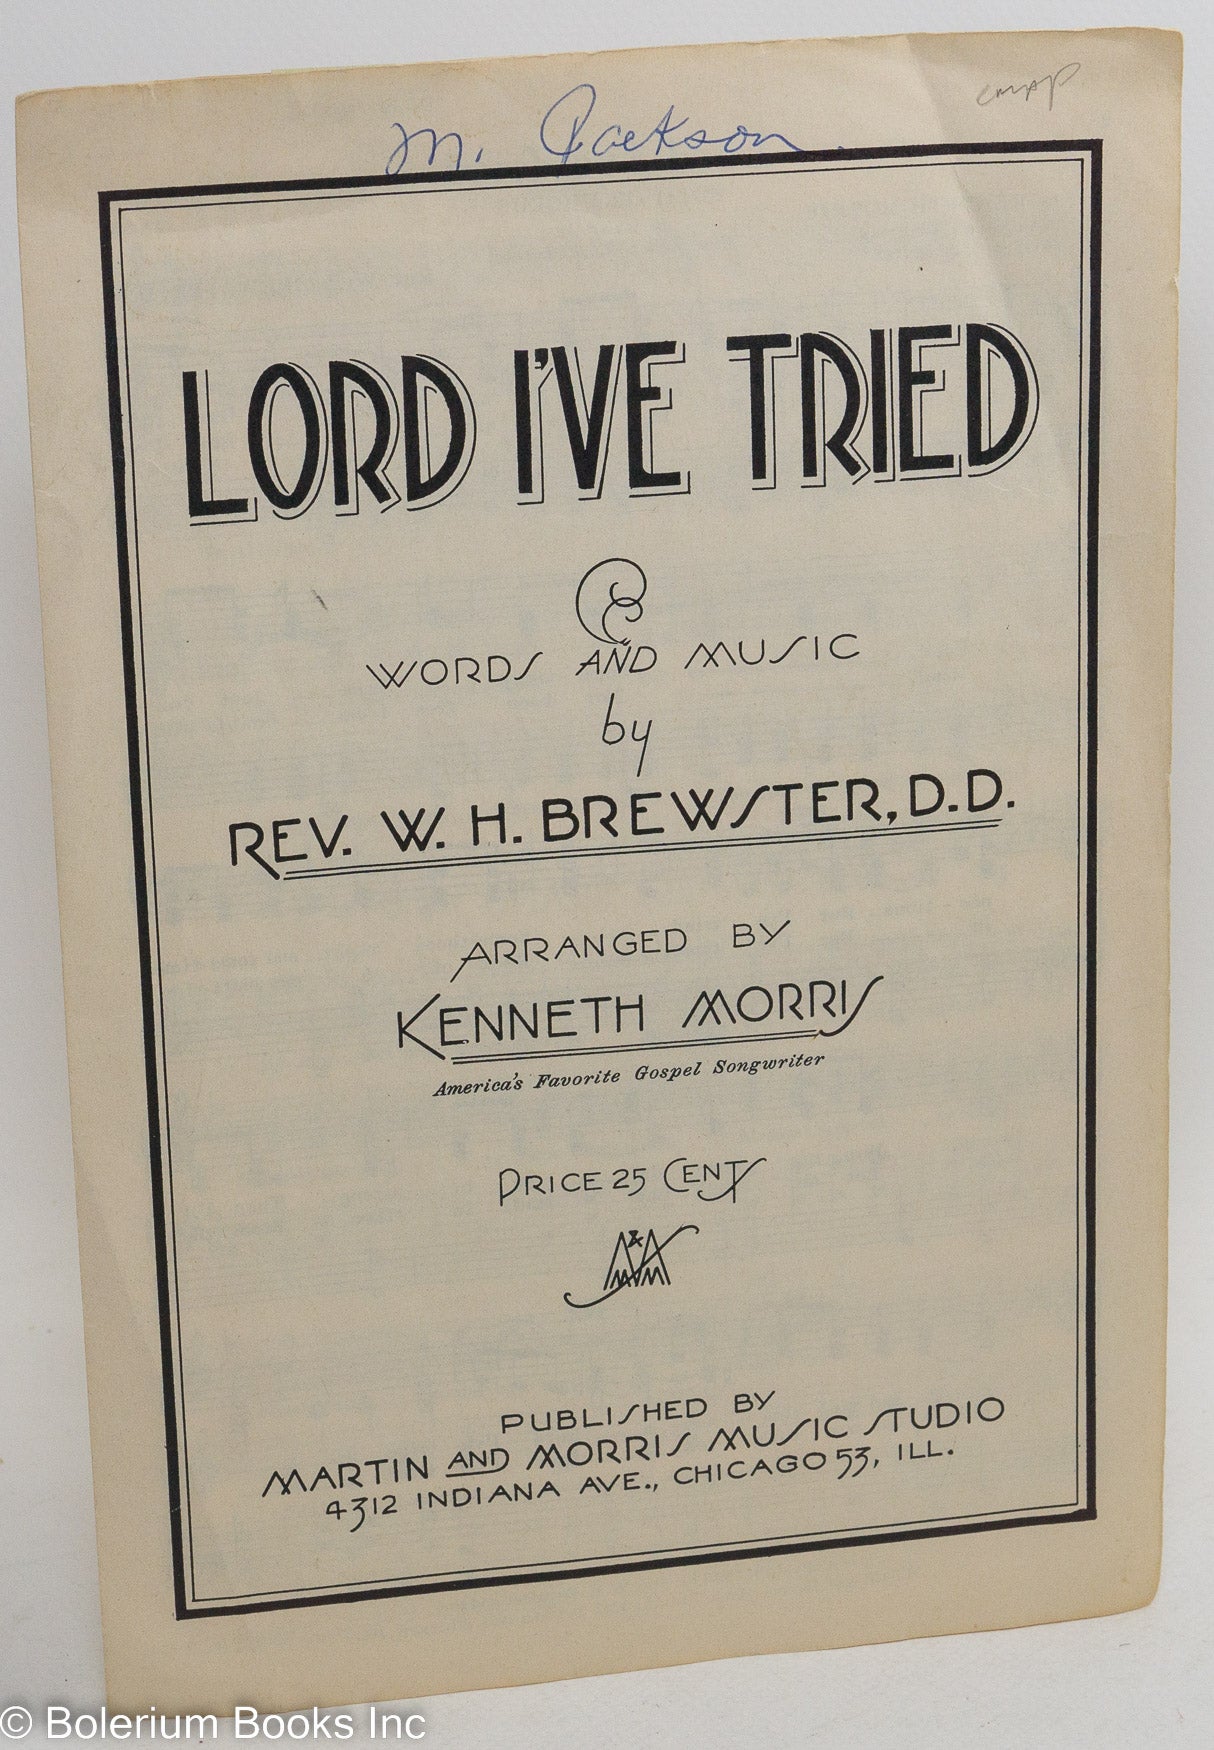 Rev.　Gospel　C.　Tried.　by　by　and　Herbert　Brewster,　Music　Mrs.　America's　As　I've　Arranged　words　Kenneth　Anderson.　Favorite　sung　W.　Words　Lord　by　Morris,　Brewster,　Queen　W.　H.　Songwriter